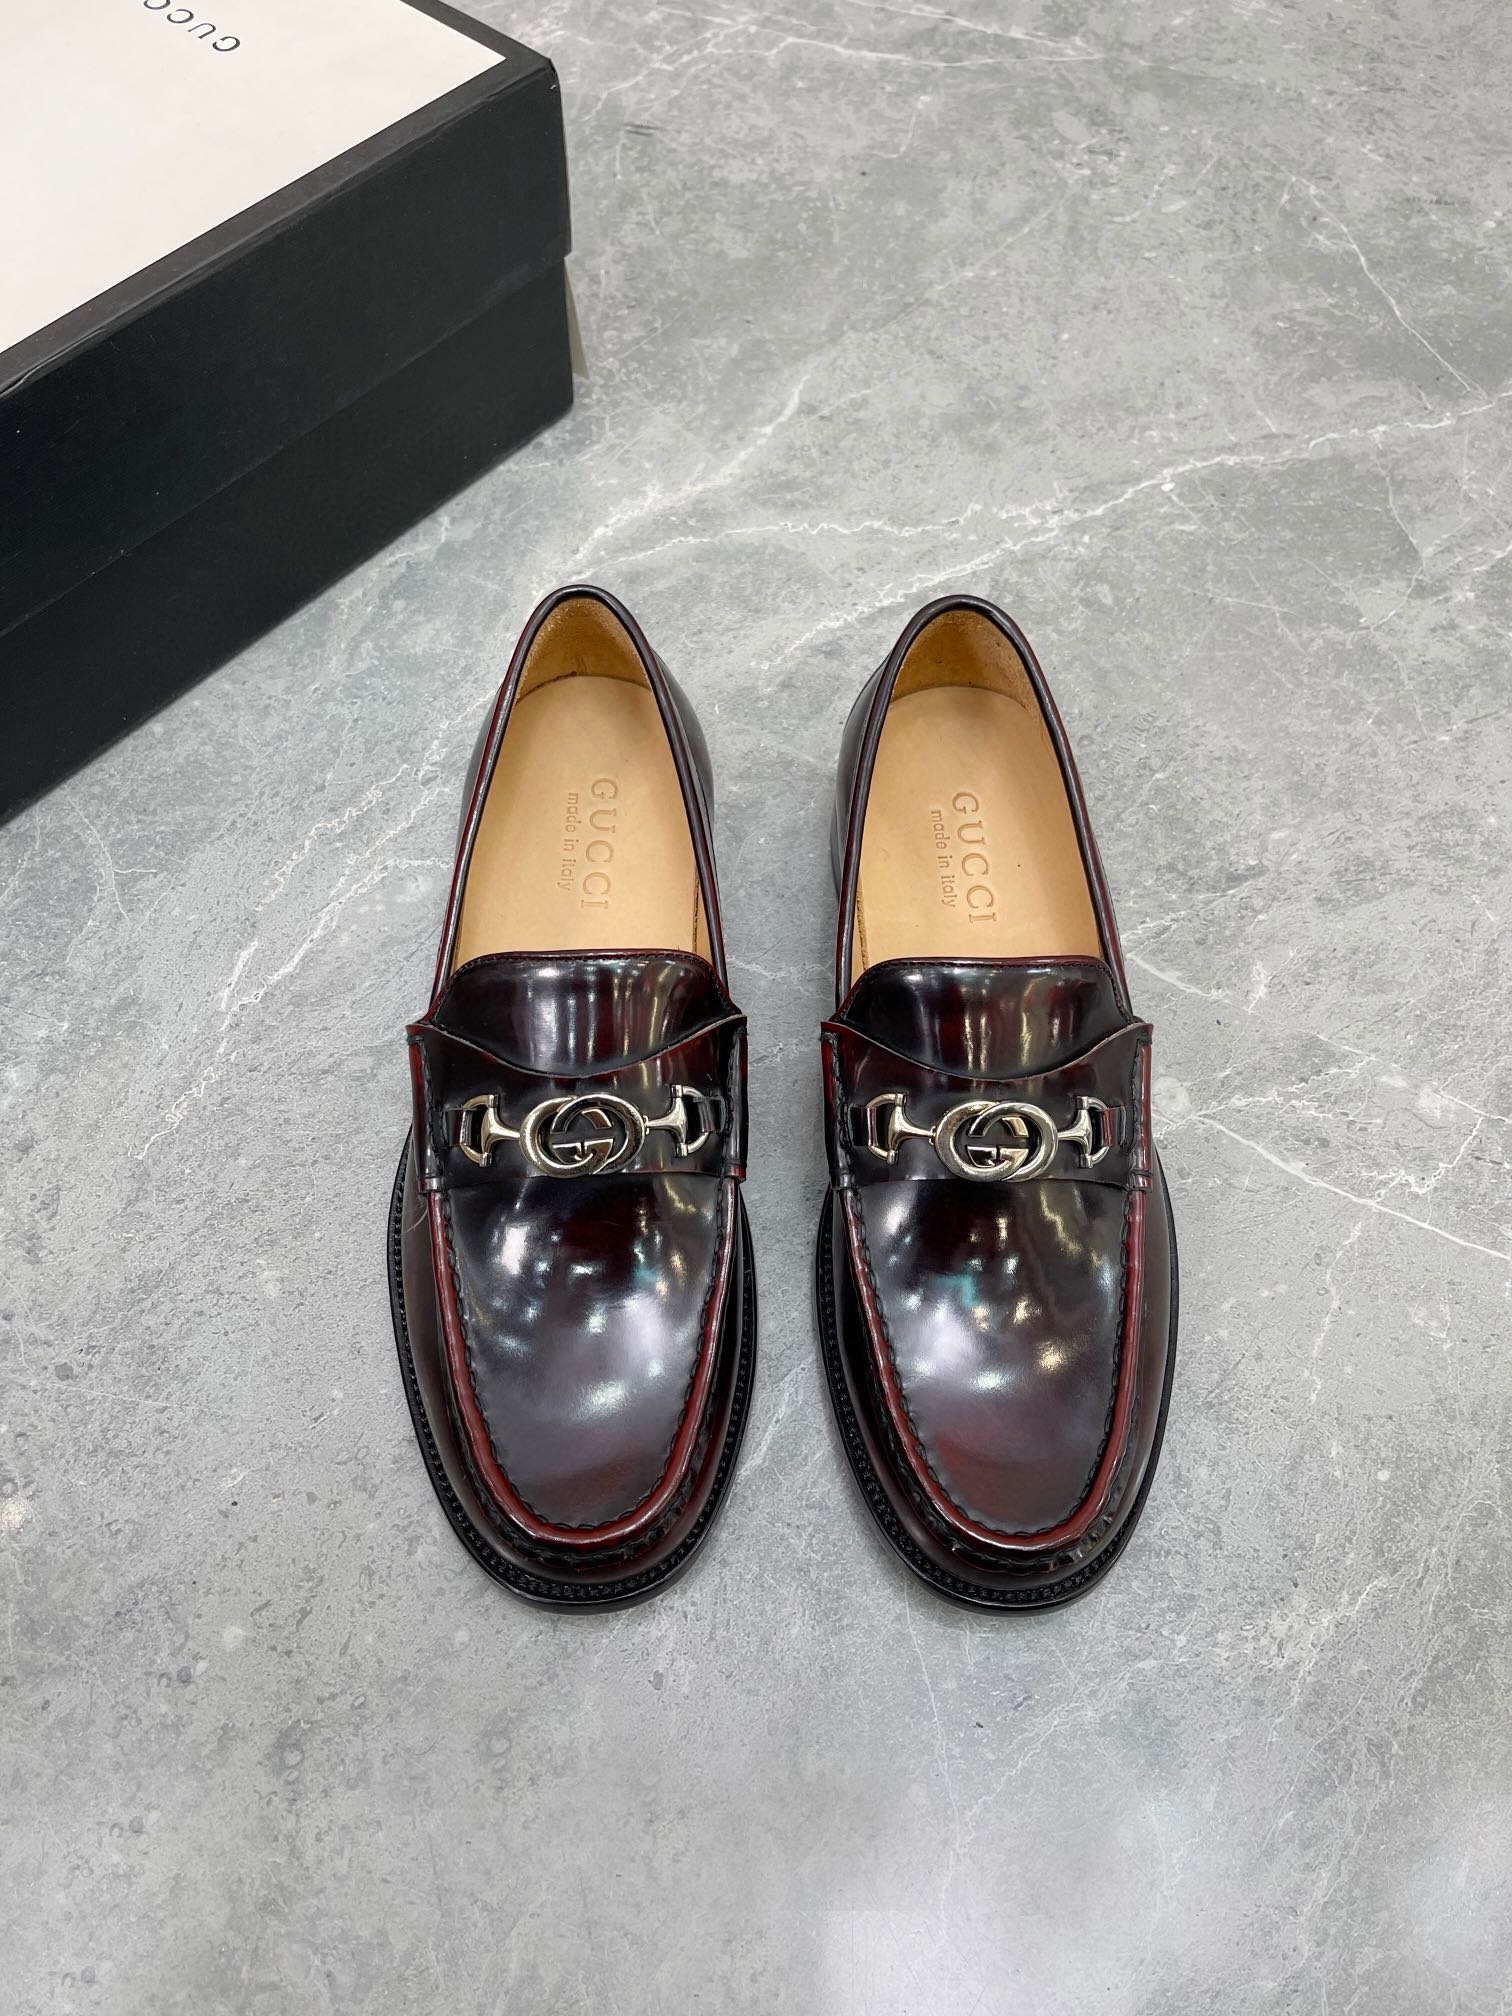 Gucci Shoes Loafers Supplier in China
 Men Cowhide Genuine Leather Casual